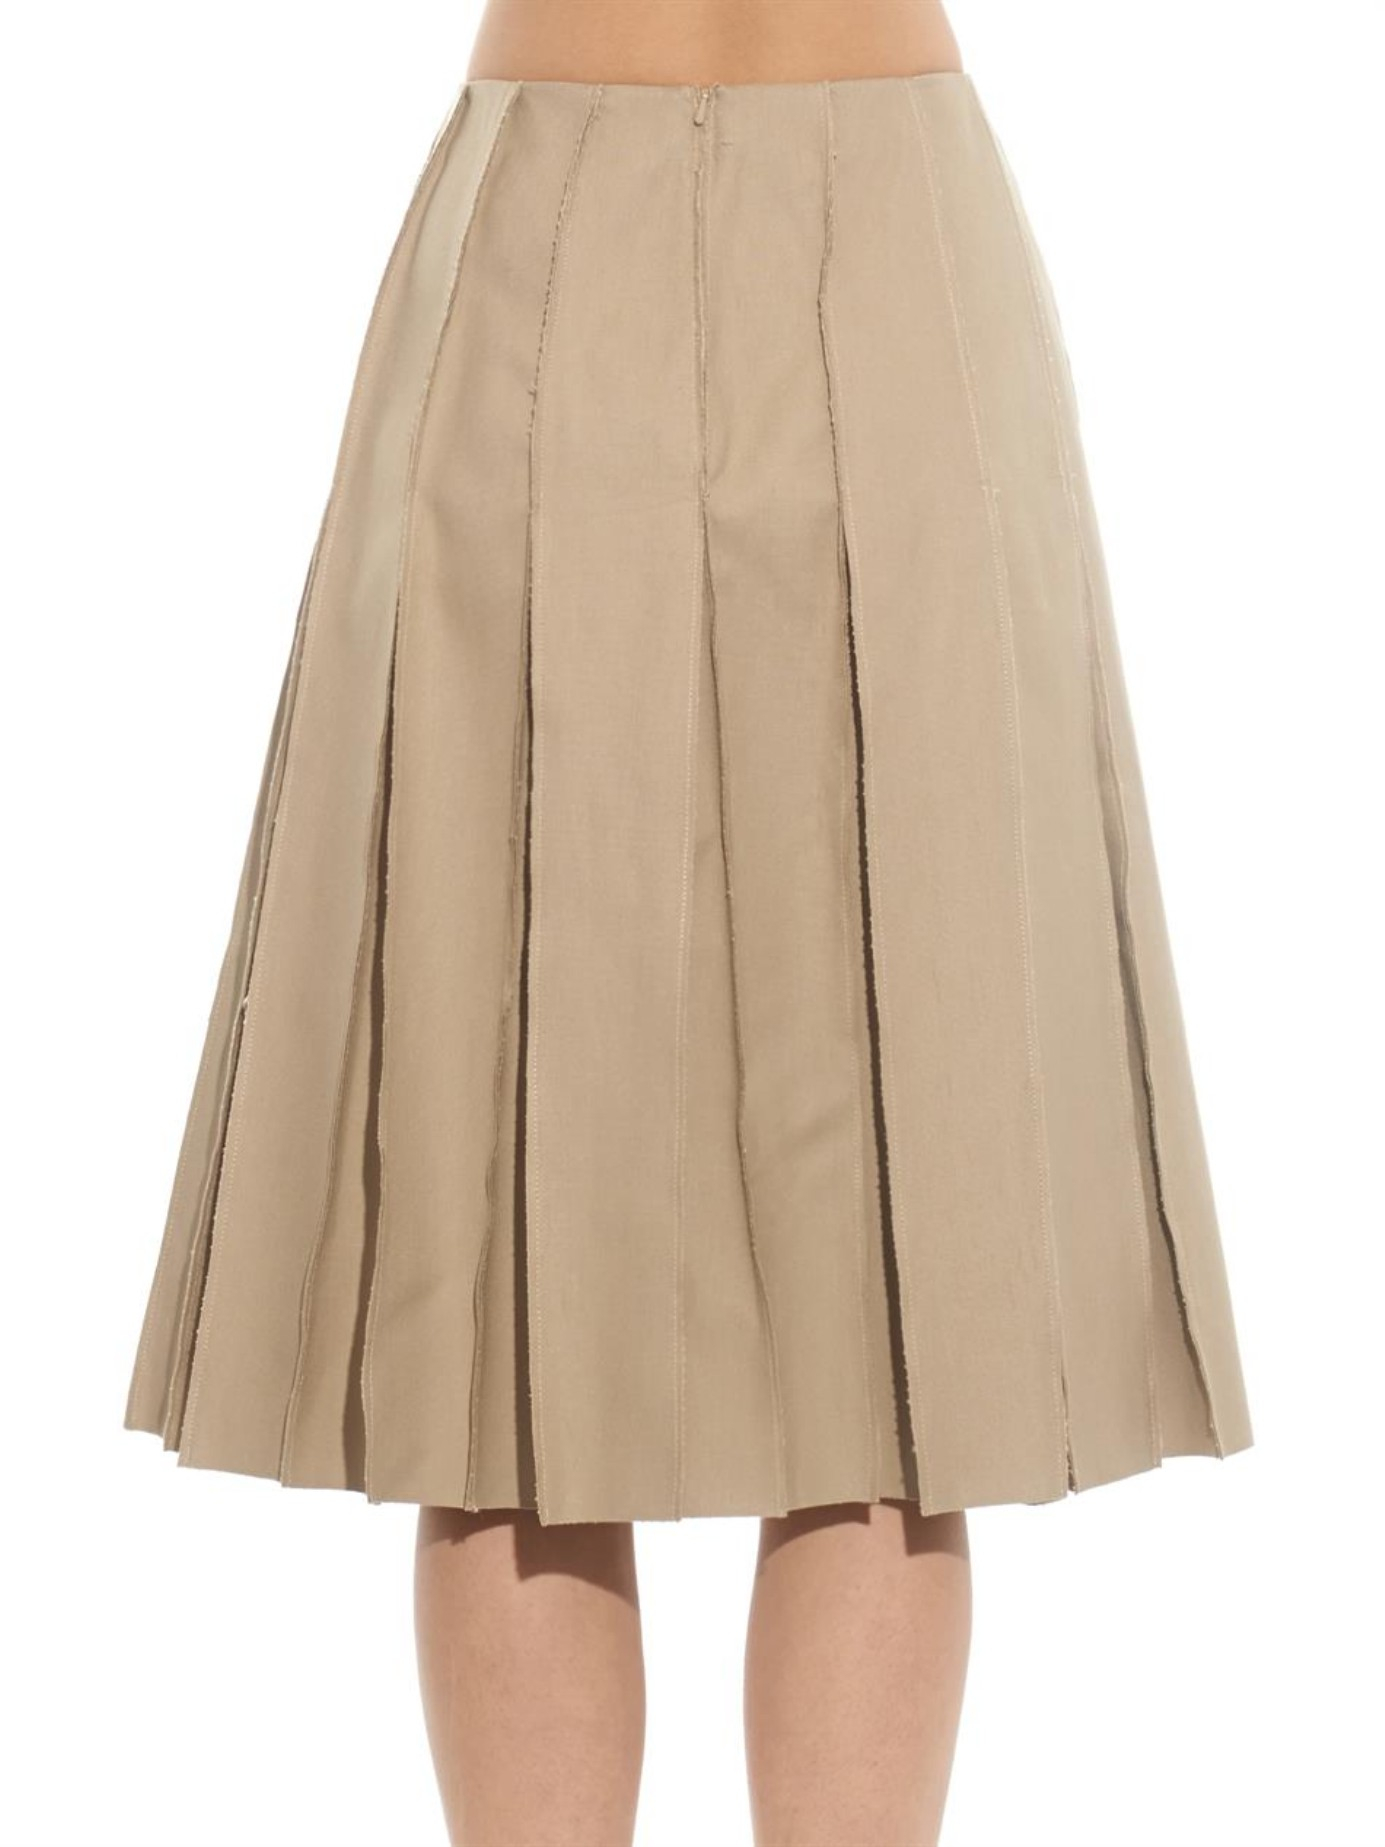 Lyst - J.W.Anderson Pleated Cotton-canvas Skirt in Natural